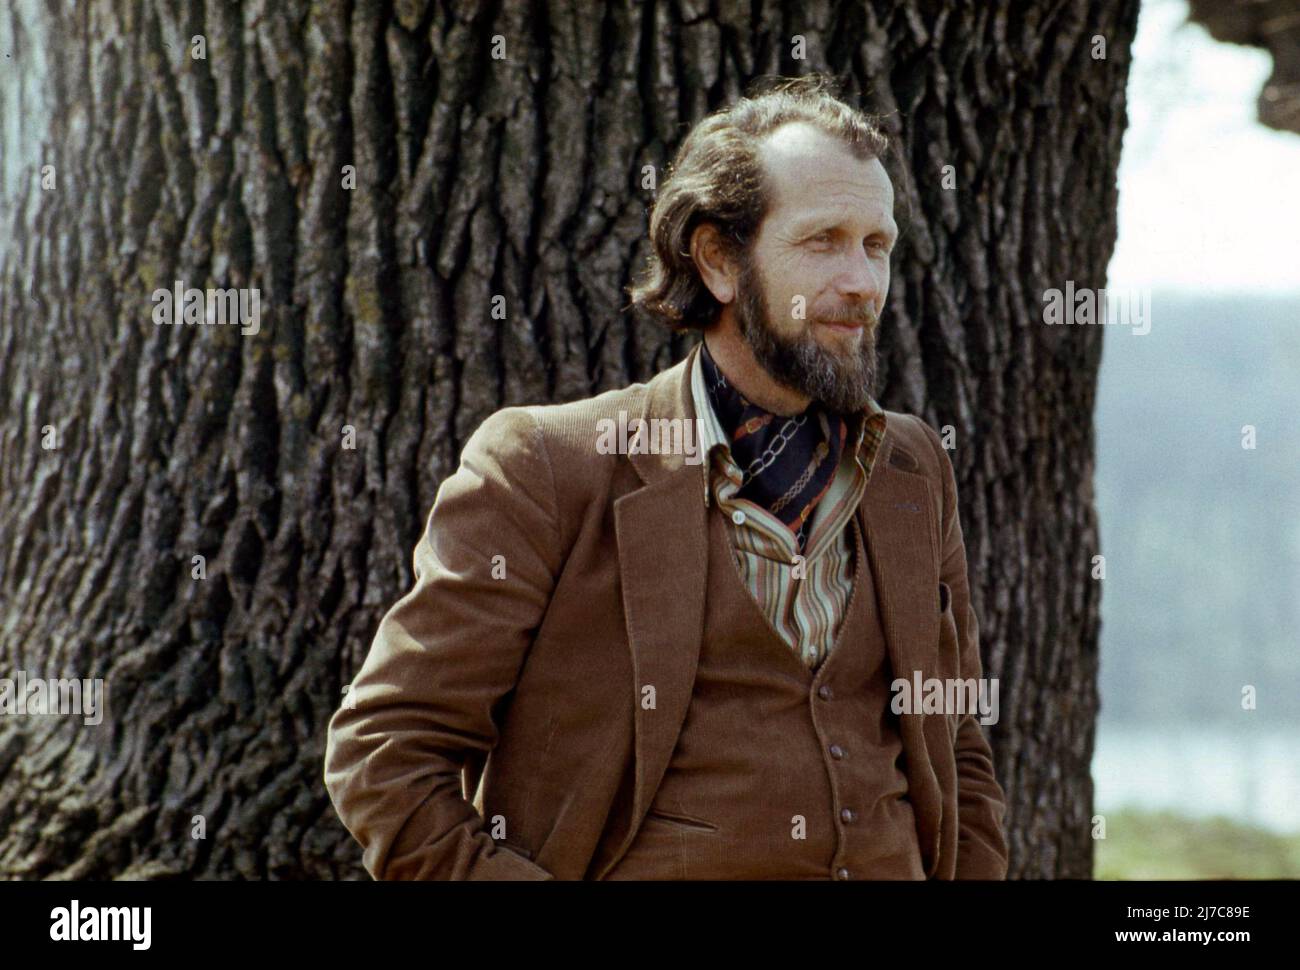 The Romanian writer Toma George Maiorescu, approx. 1975 Stock Photo